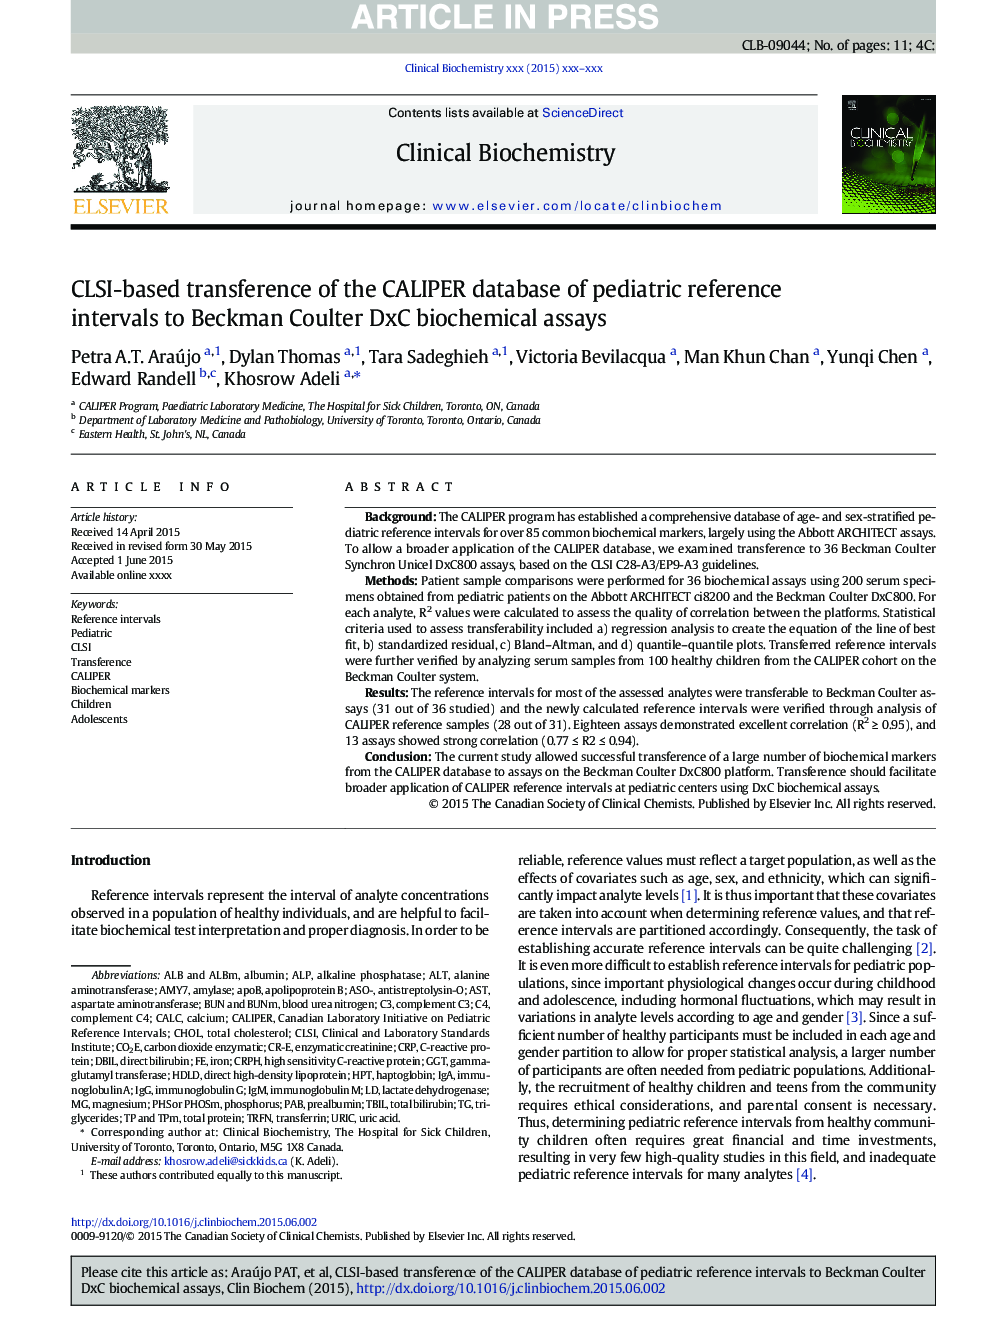 CLSI-based transference of the CALIPER database of pediatric reference intervals to Beckman Coulter DxC biochemical assays